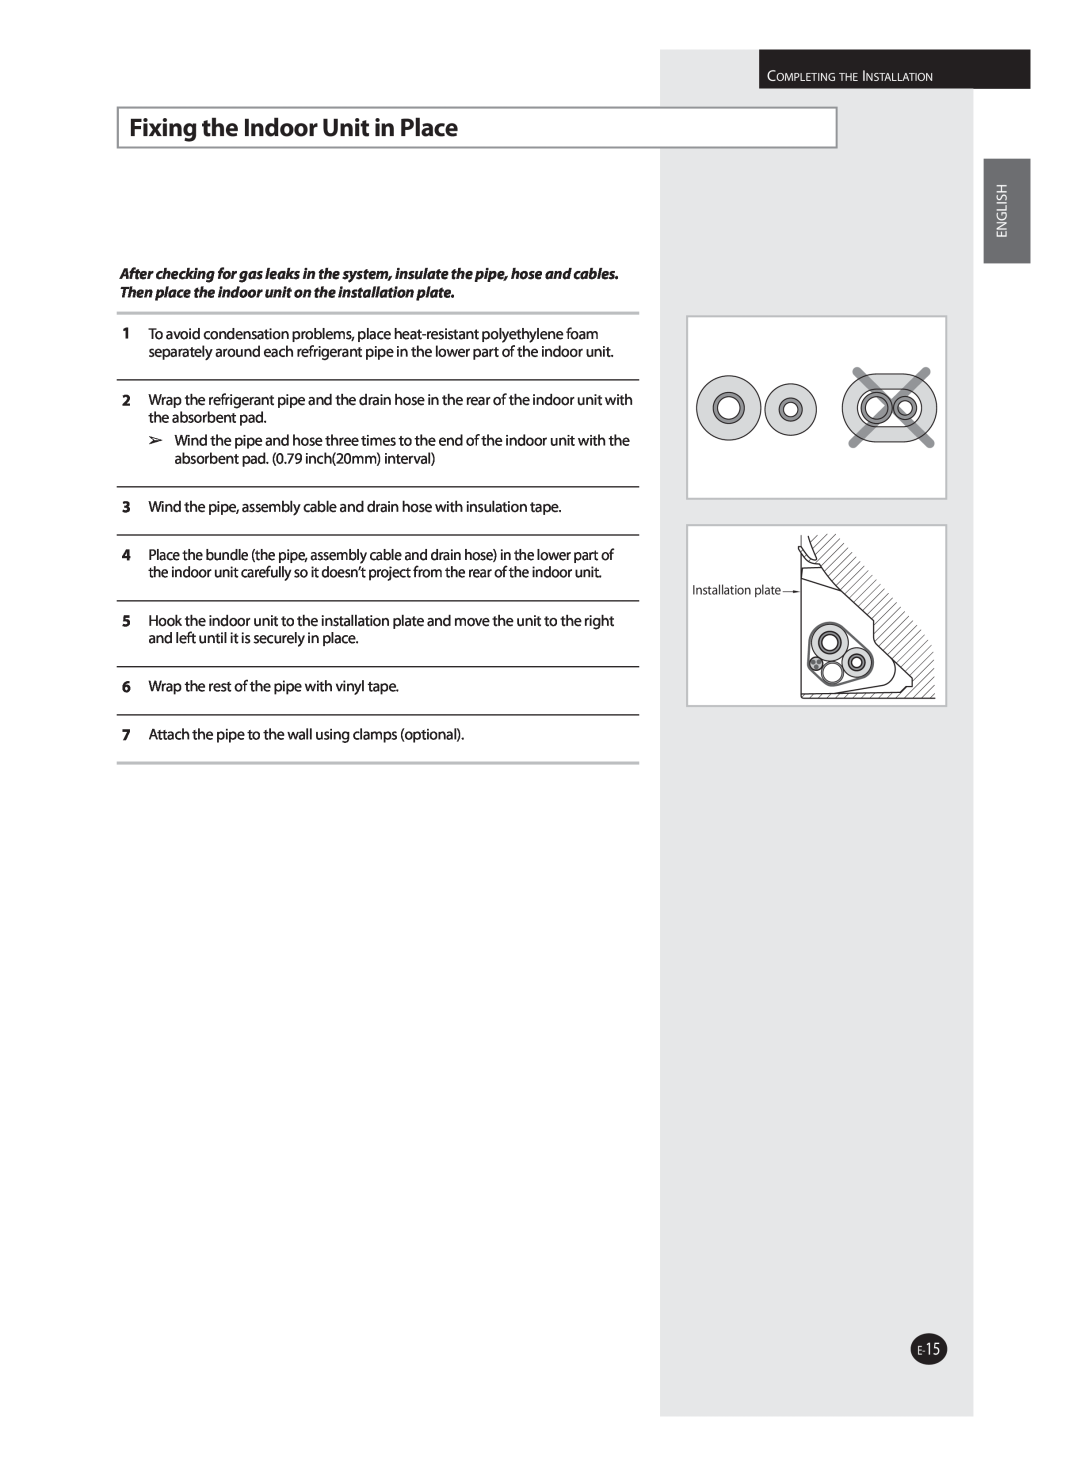 Samsung AQV09J installation manual Fixing the Indoor Unit in Place, English 